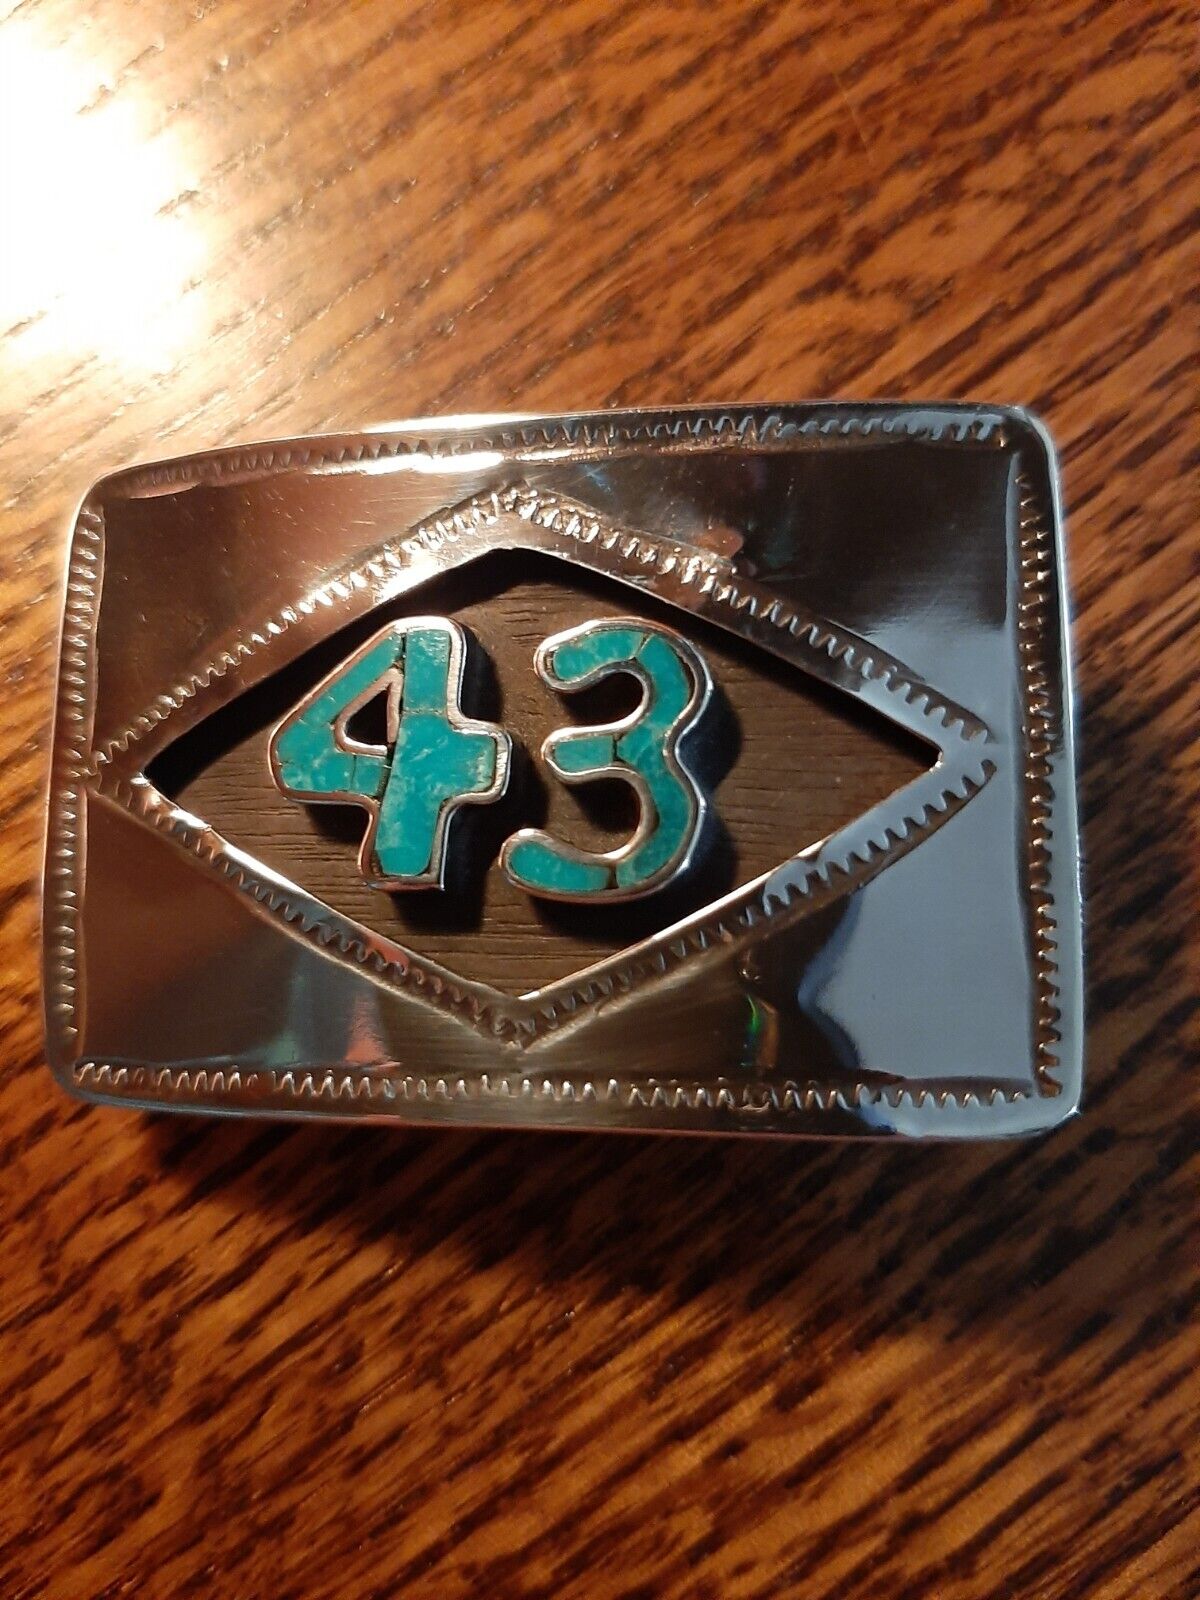 CUSTOM RICHARD PETTY SILVER/TURQUOISE  BELT BUCKLE 1970s.  SIGNED.  EXCELLENT